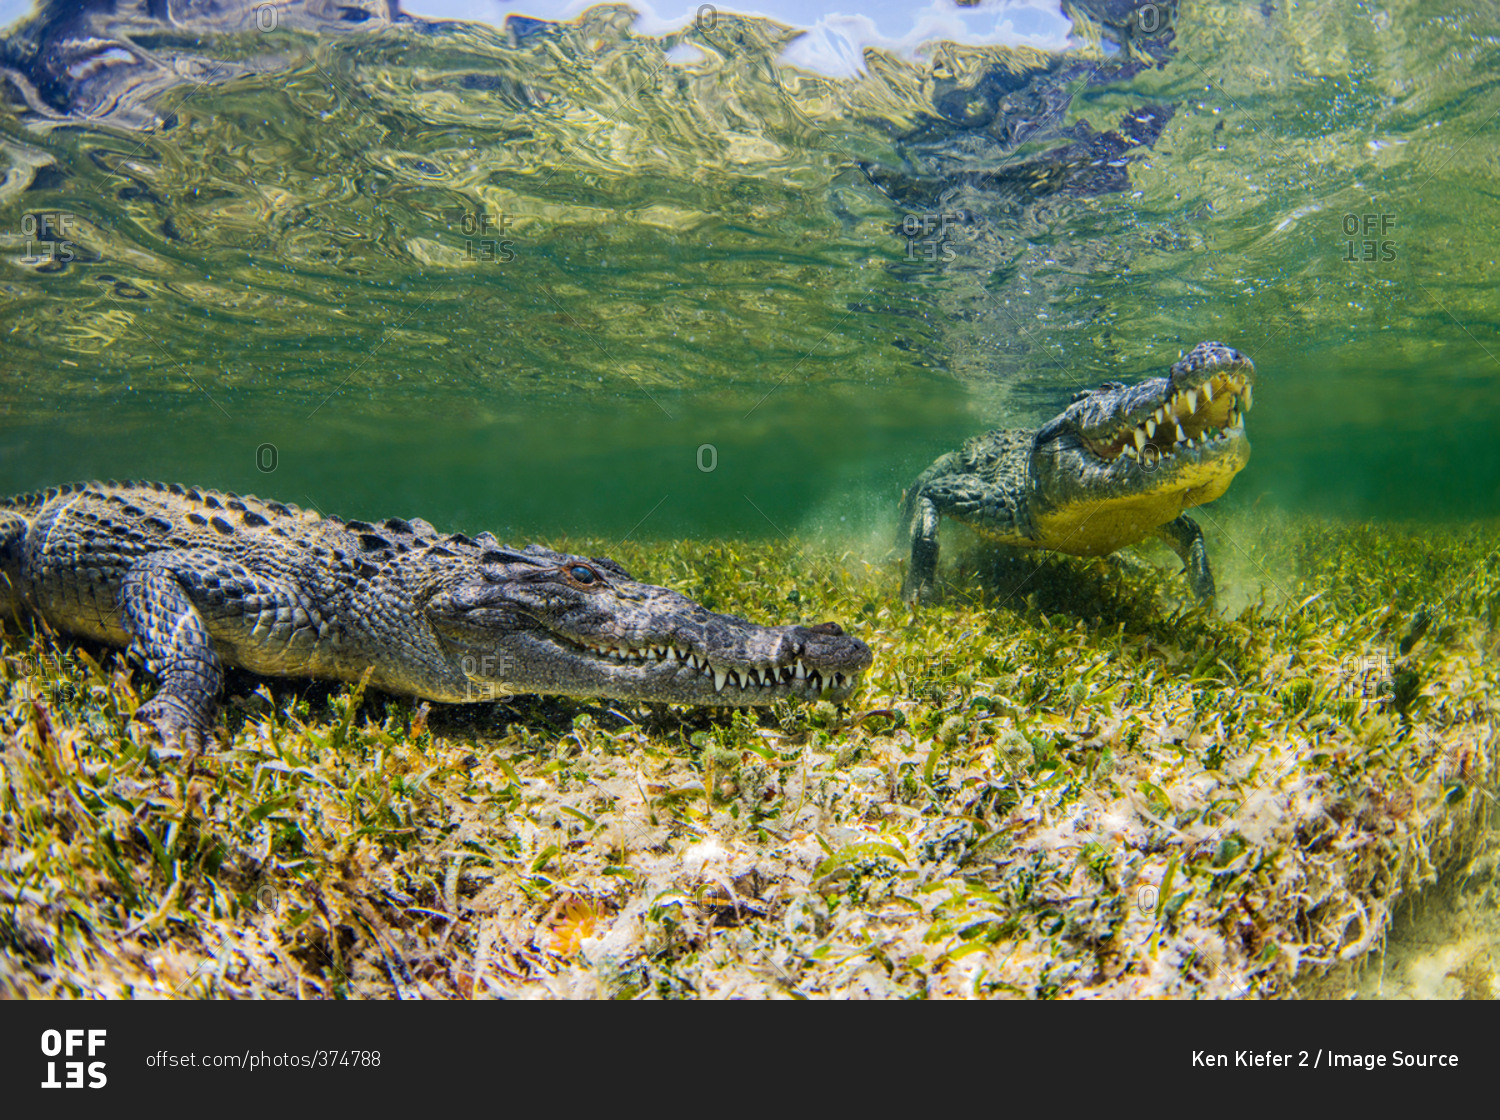 Underwater view of two crocodiles on reef, Chinchorro Banks, Mexico